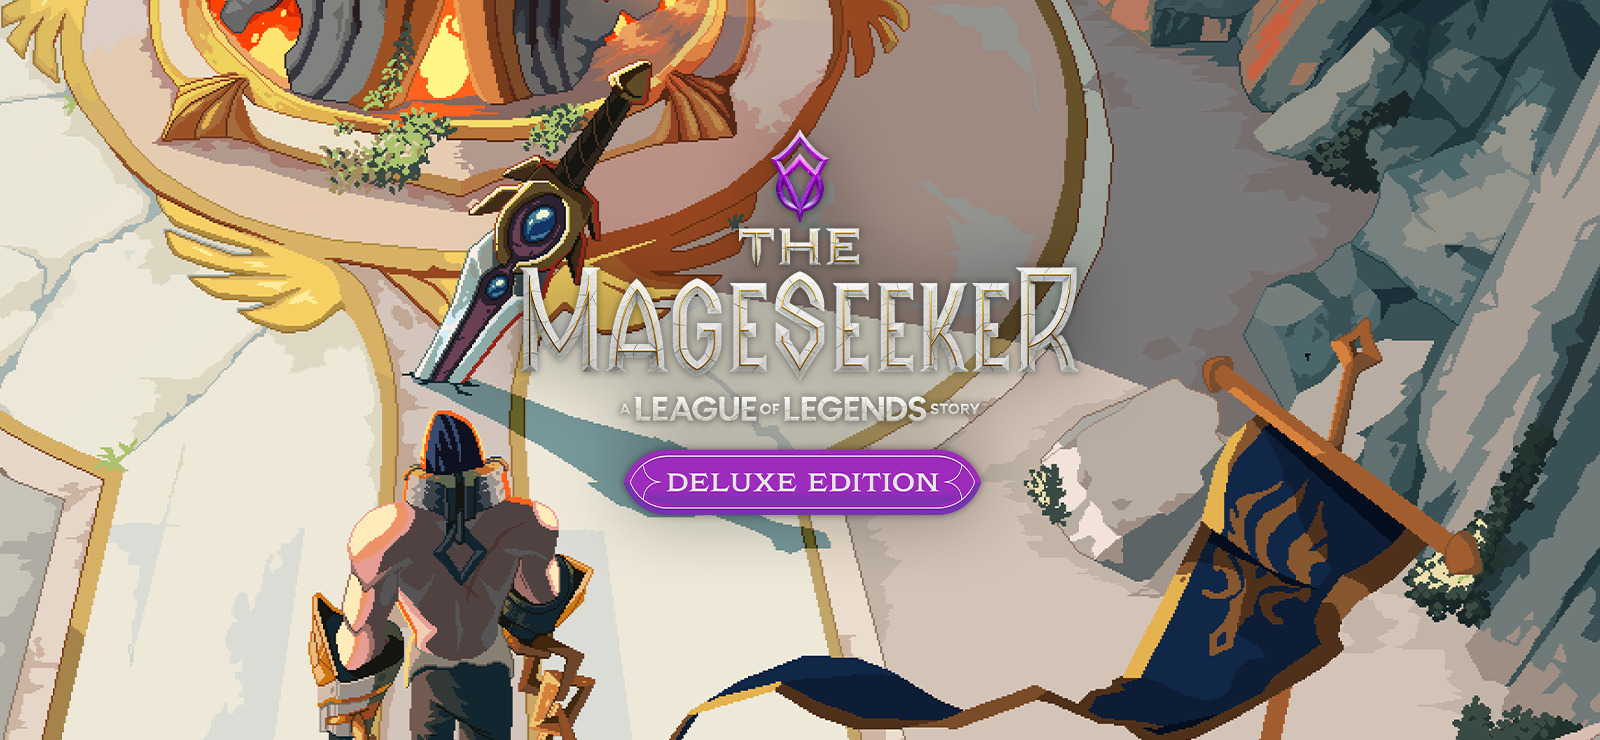 The Mageseeker: A League of Legends Story™ download the last version for android